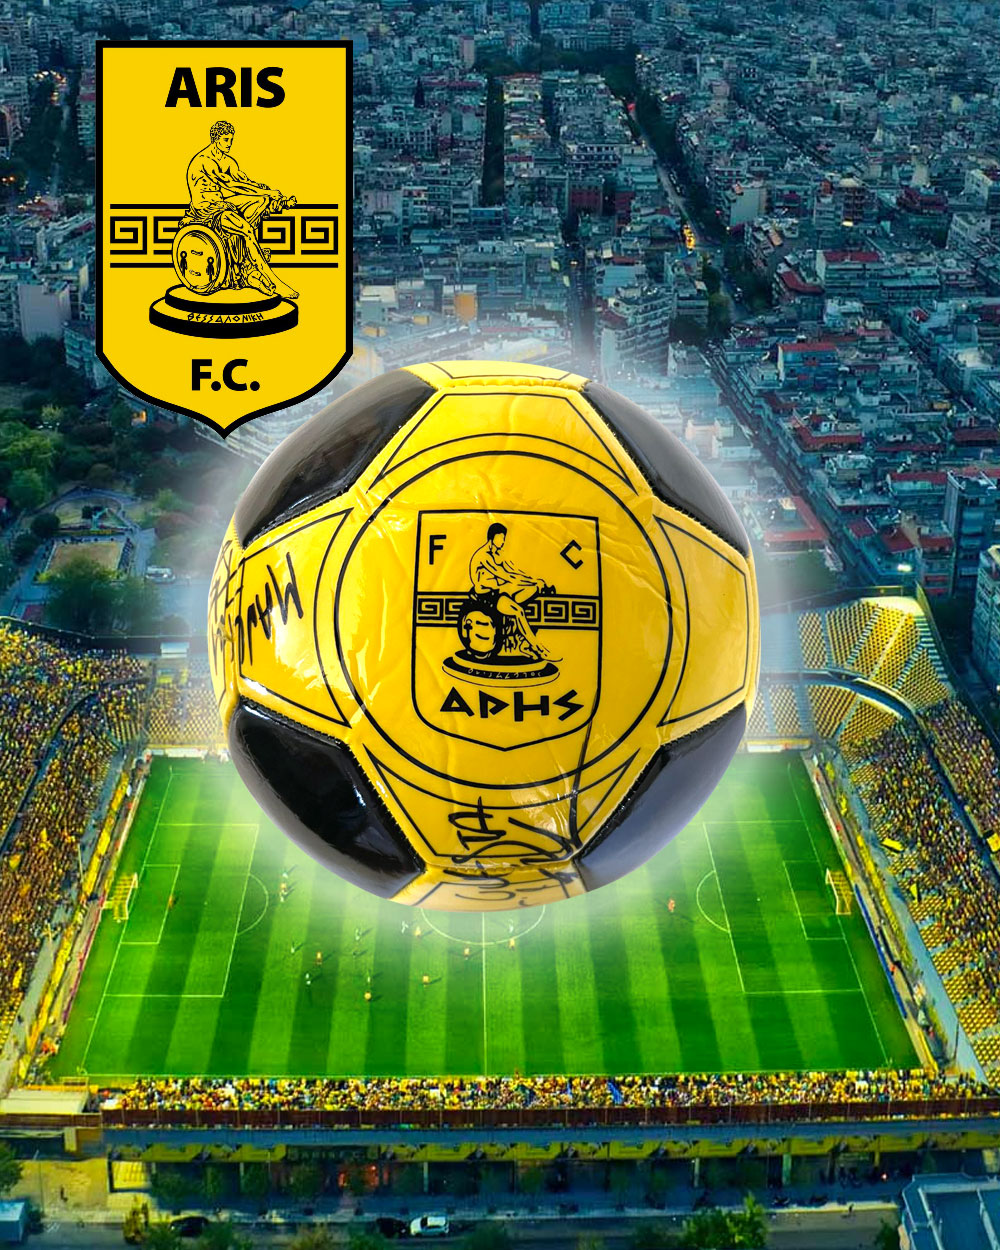 <p><span style="background-color:rgb(247, 247, 248); color:rgb(55, 65, 81)">Official Contract Furniture Partner of  ARIS FC for the 2022-2024 seasons.</span></p>